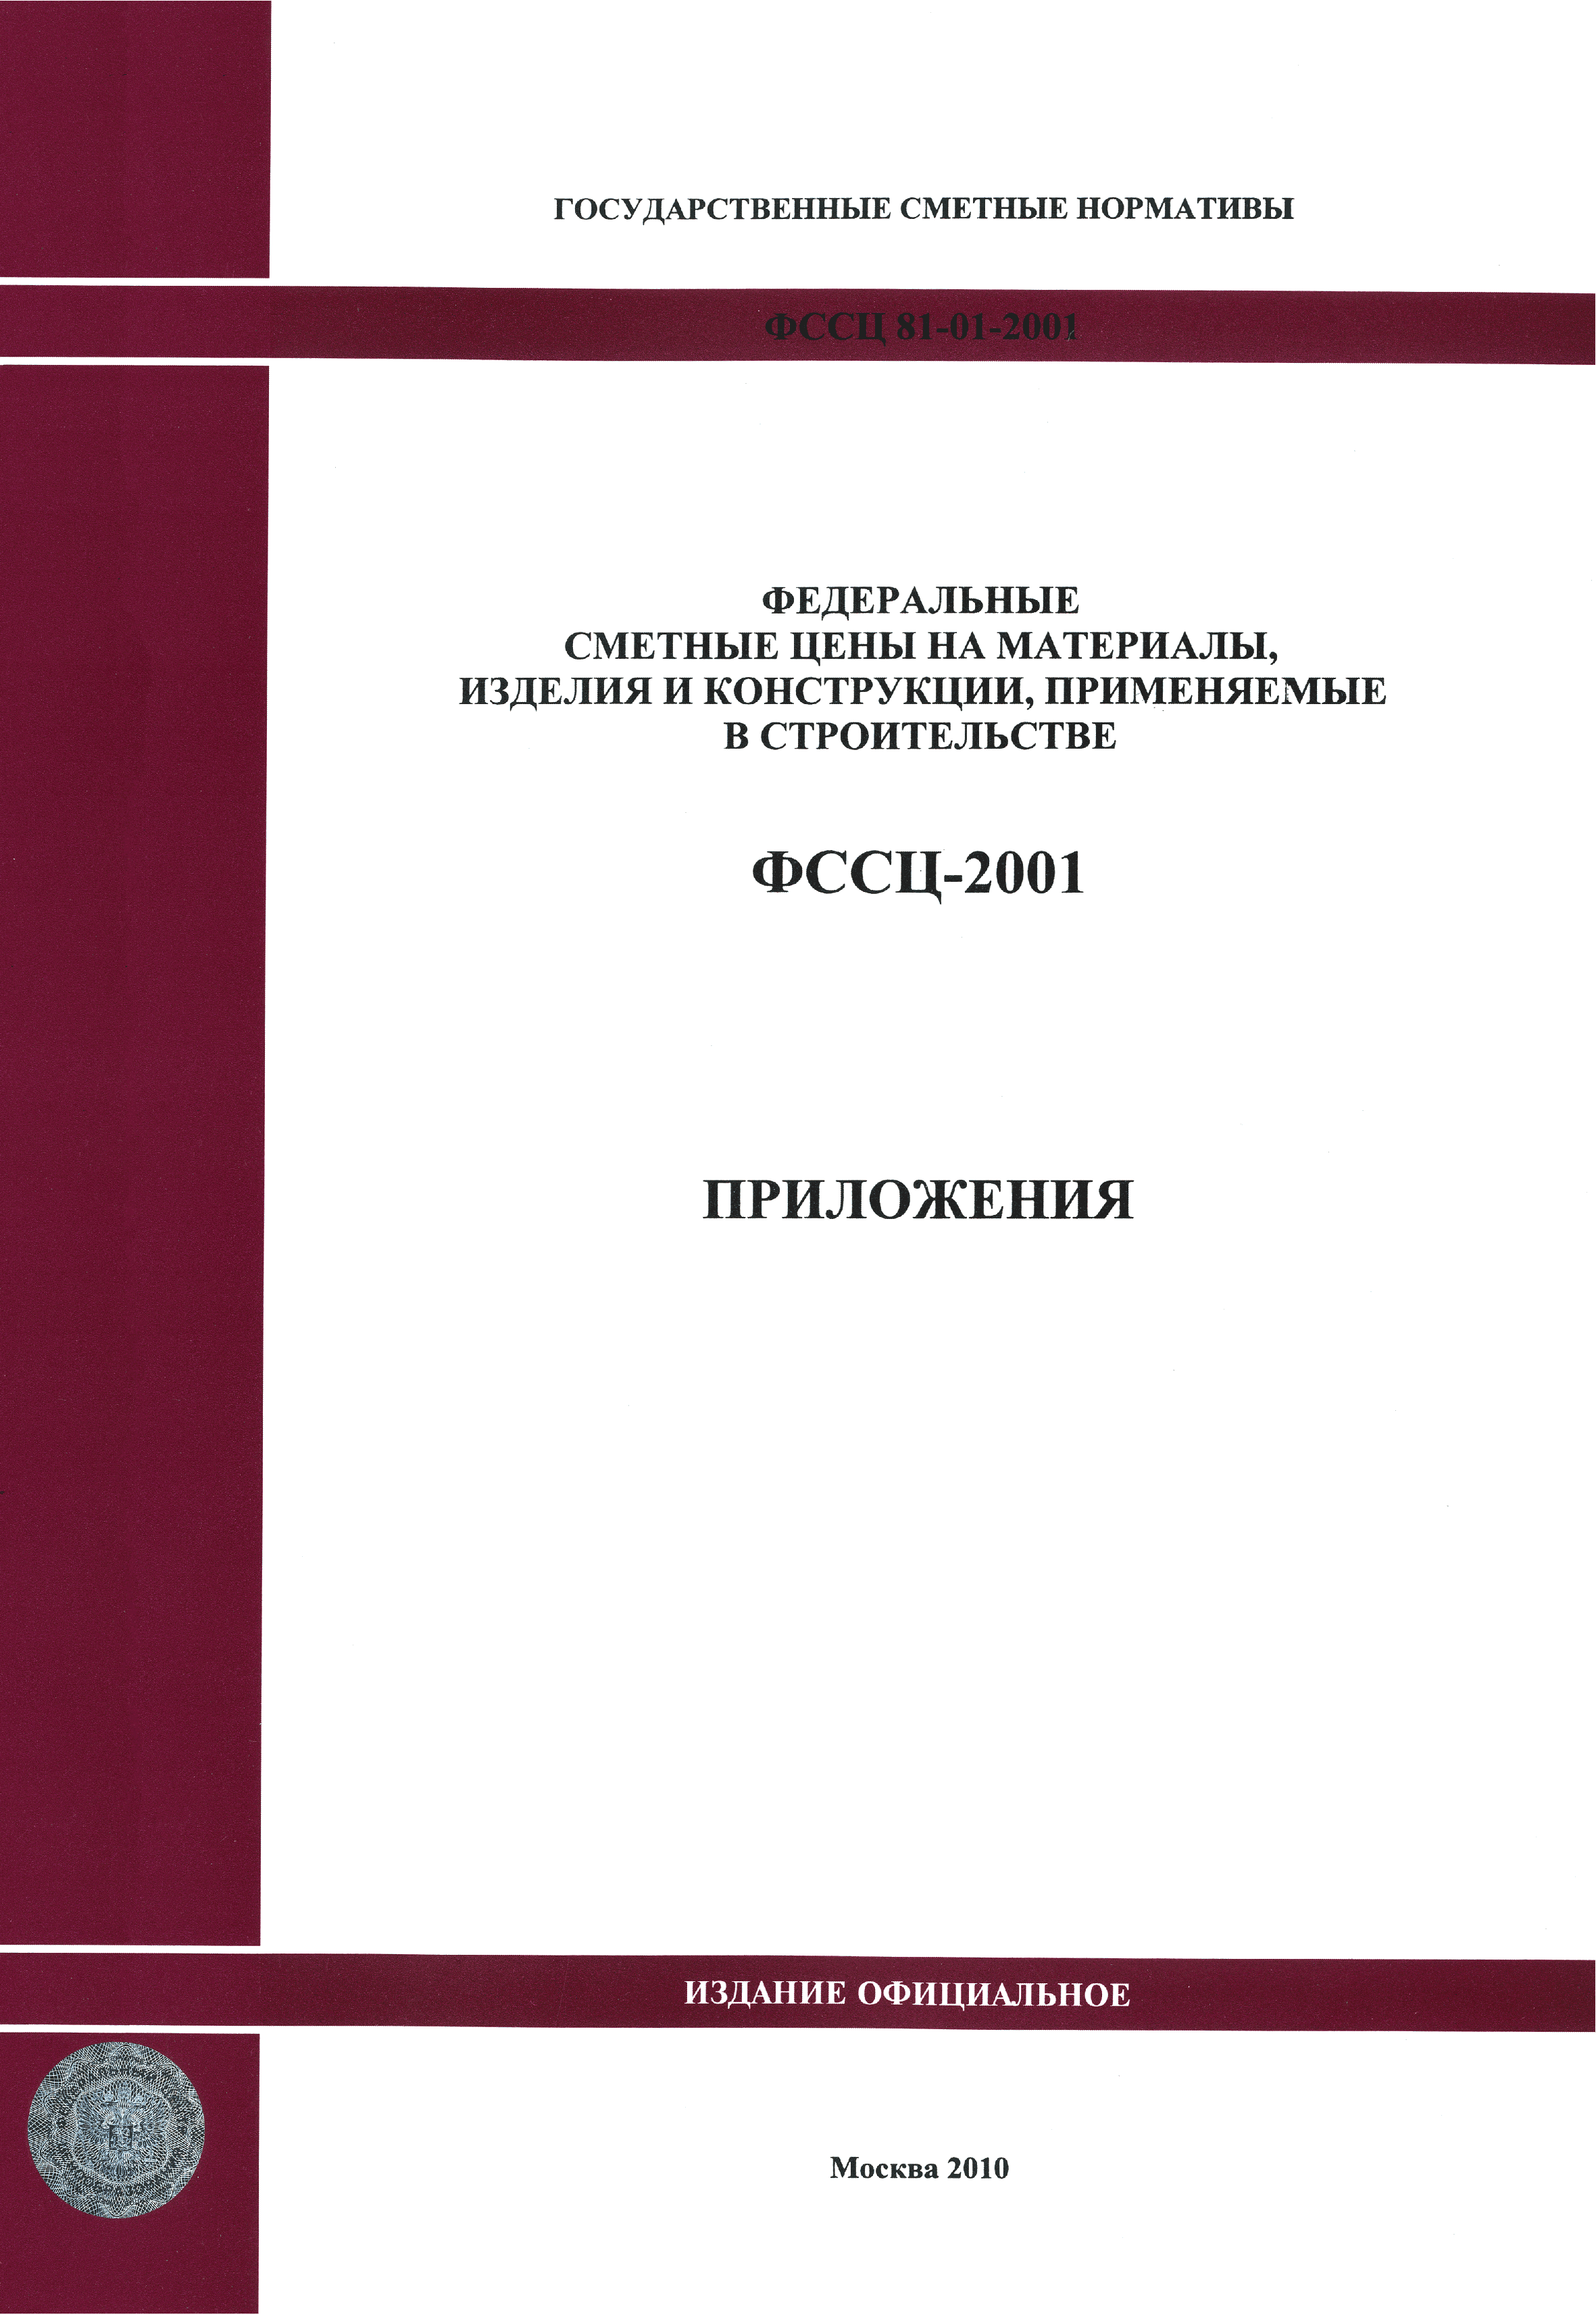 ФССЦ 2001